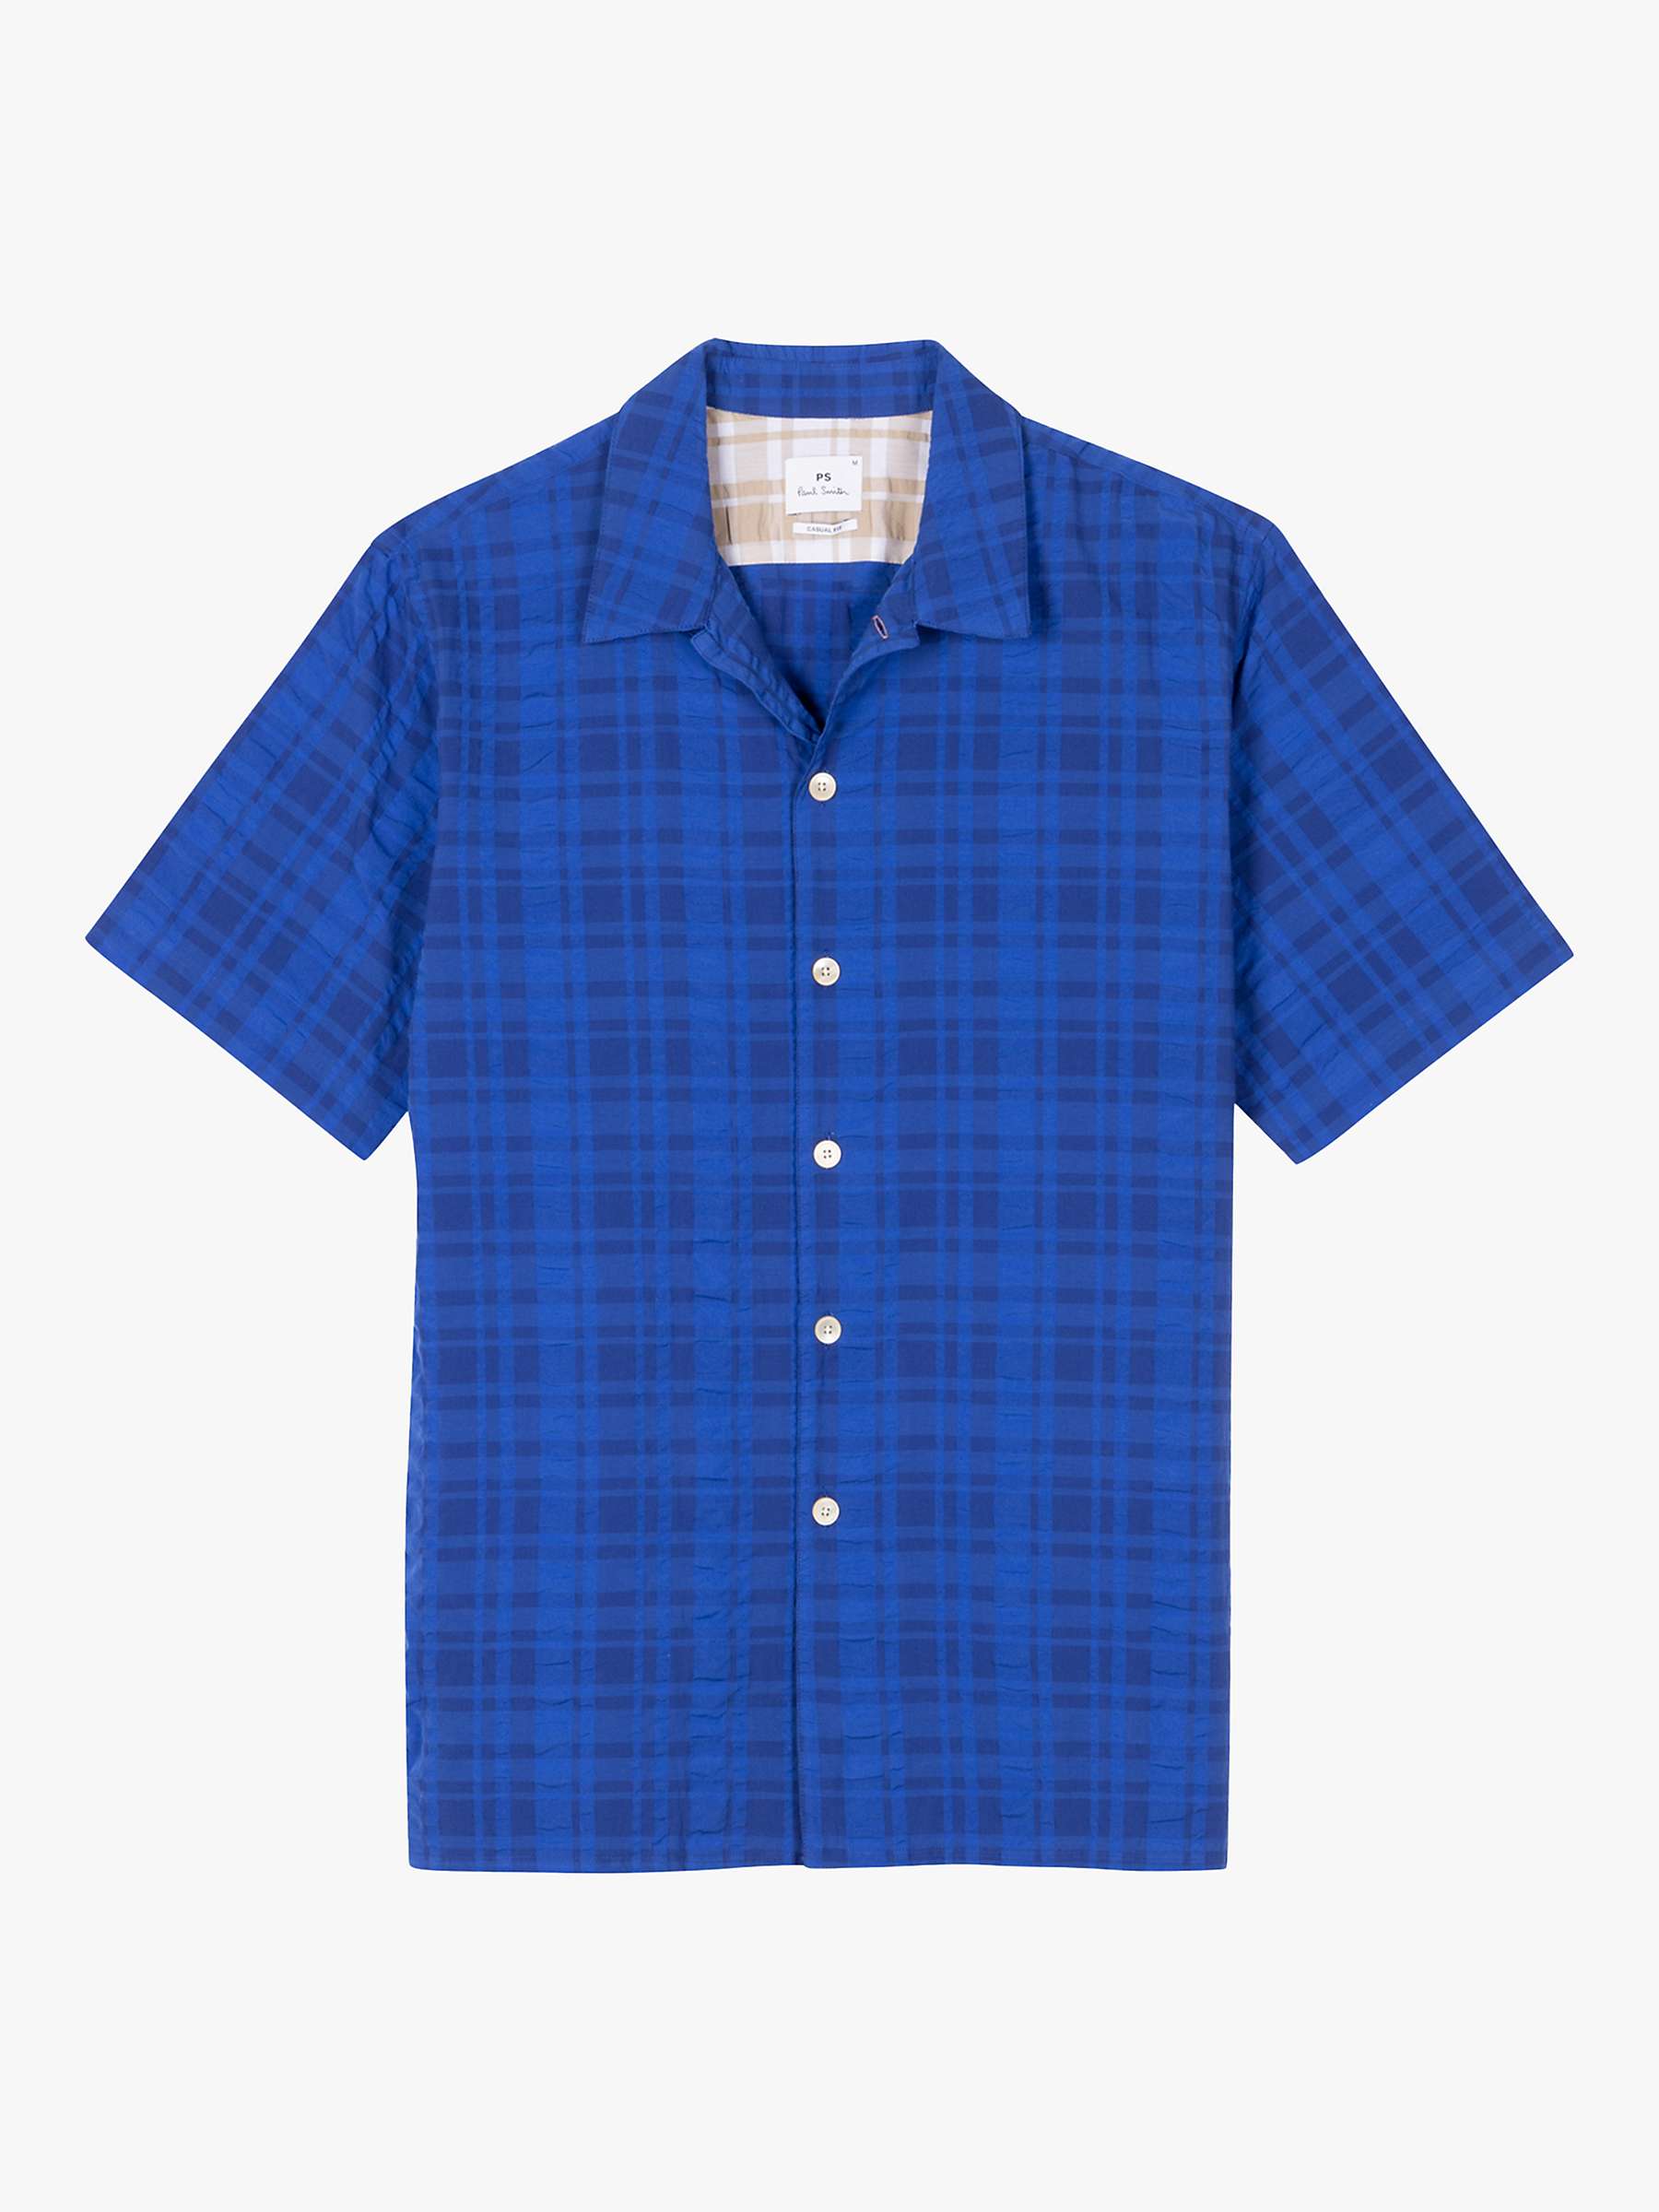 Buy PS Paul Smith Cotton Short Sleeve Check Shirt, Blues Online at johnlewis.com